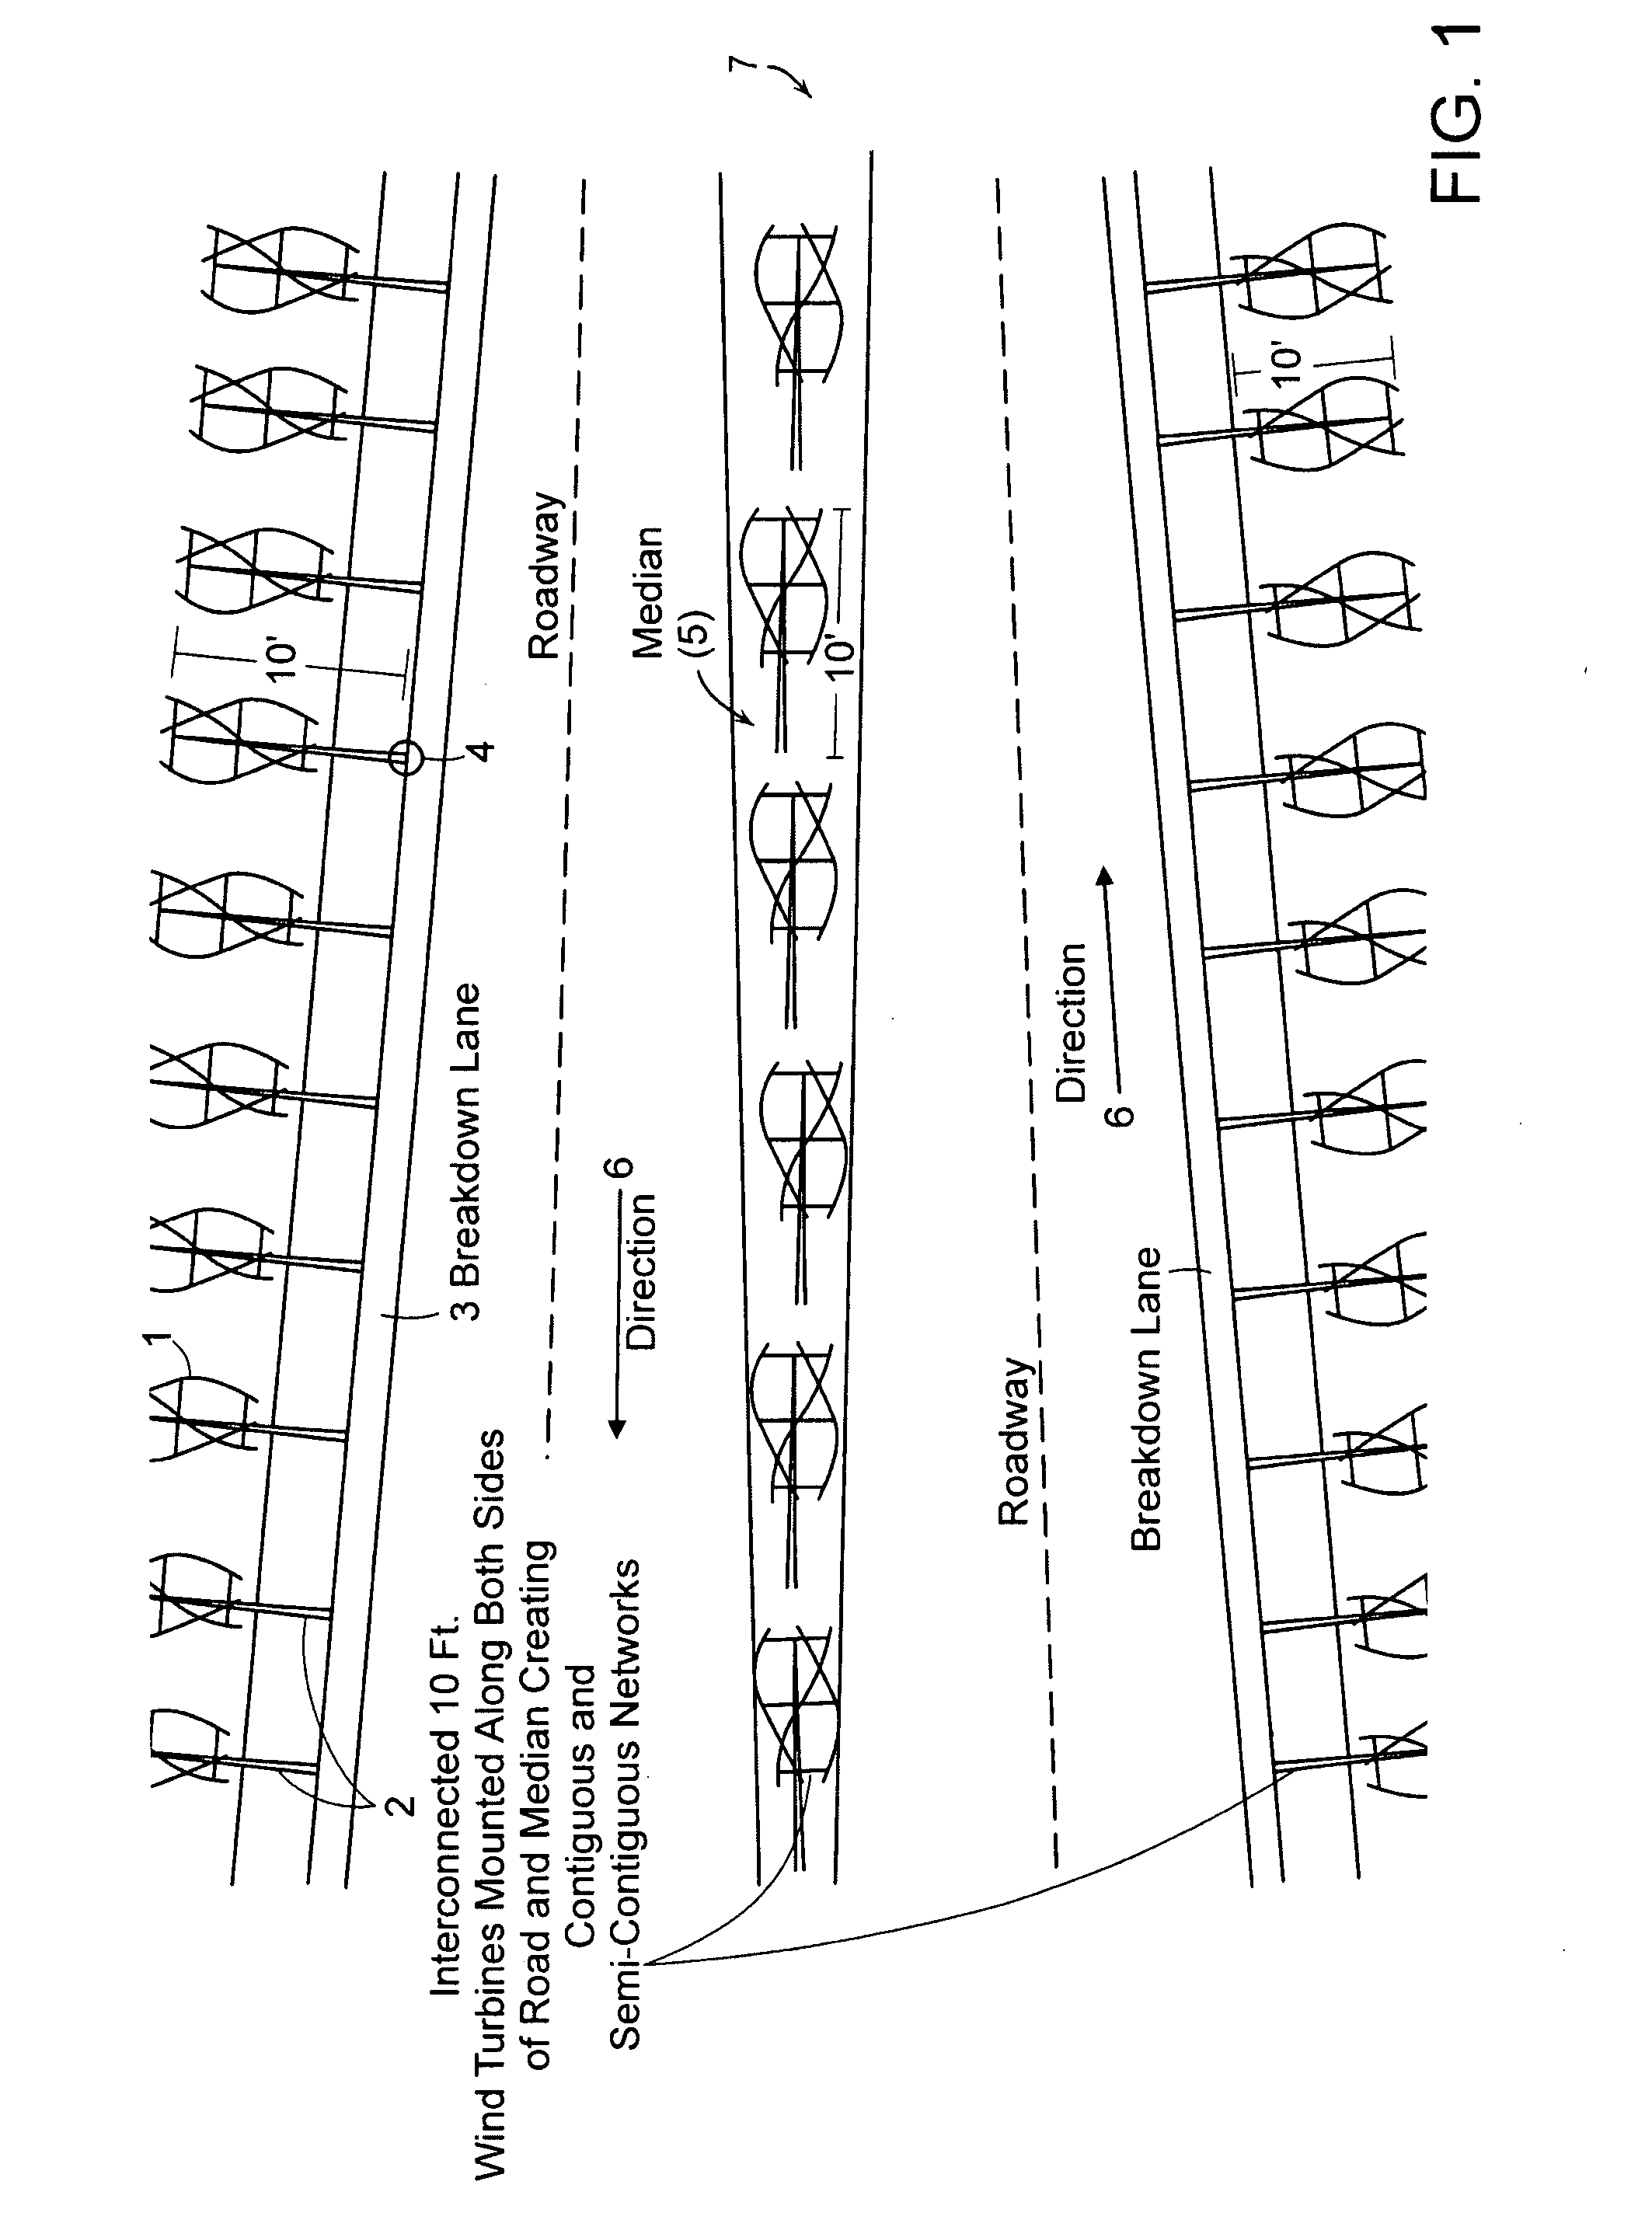 System and Method for Creating a Geothermal Roadway Utility with Alternative Energy Pumping Billing System